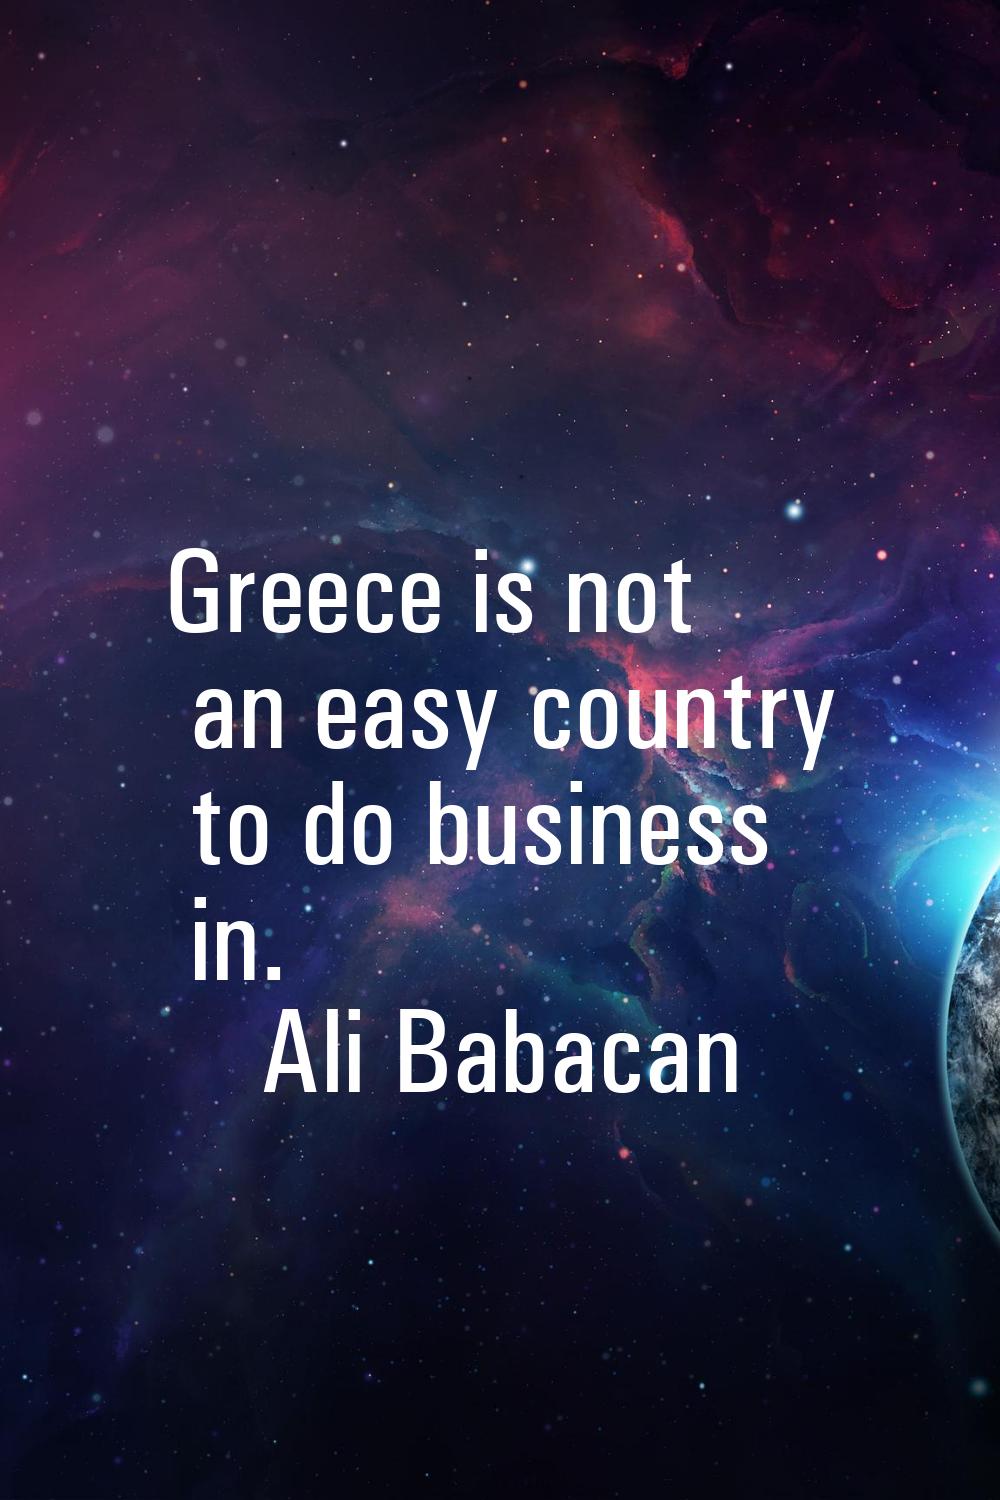 Greece is not an easy country to do business in.